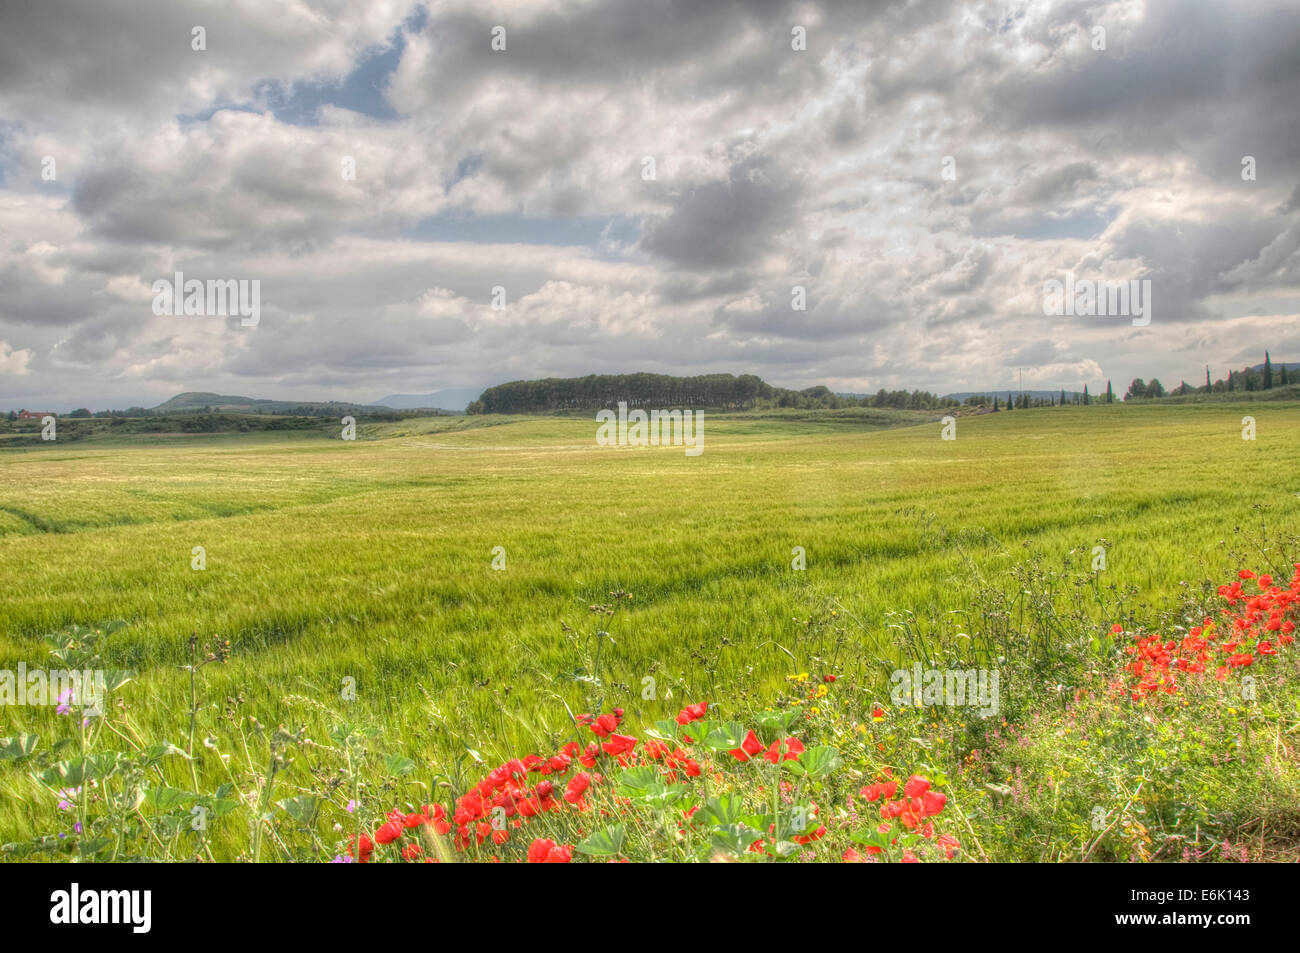 A field of wheat in a cloudy day Stock Photo